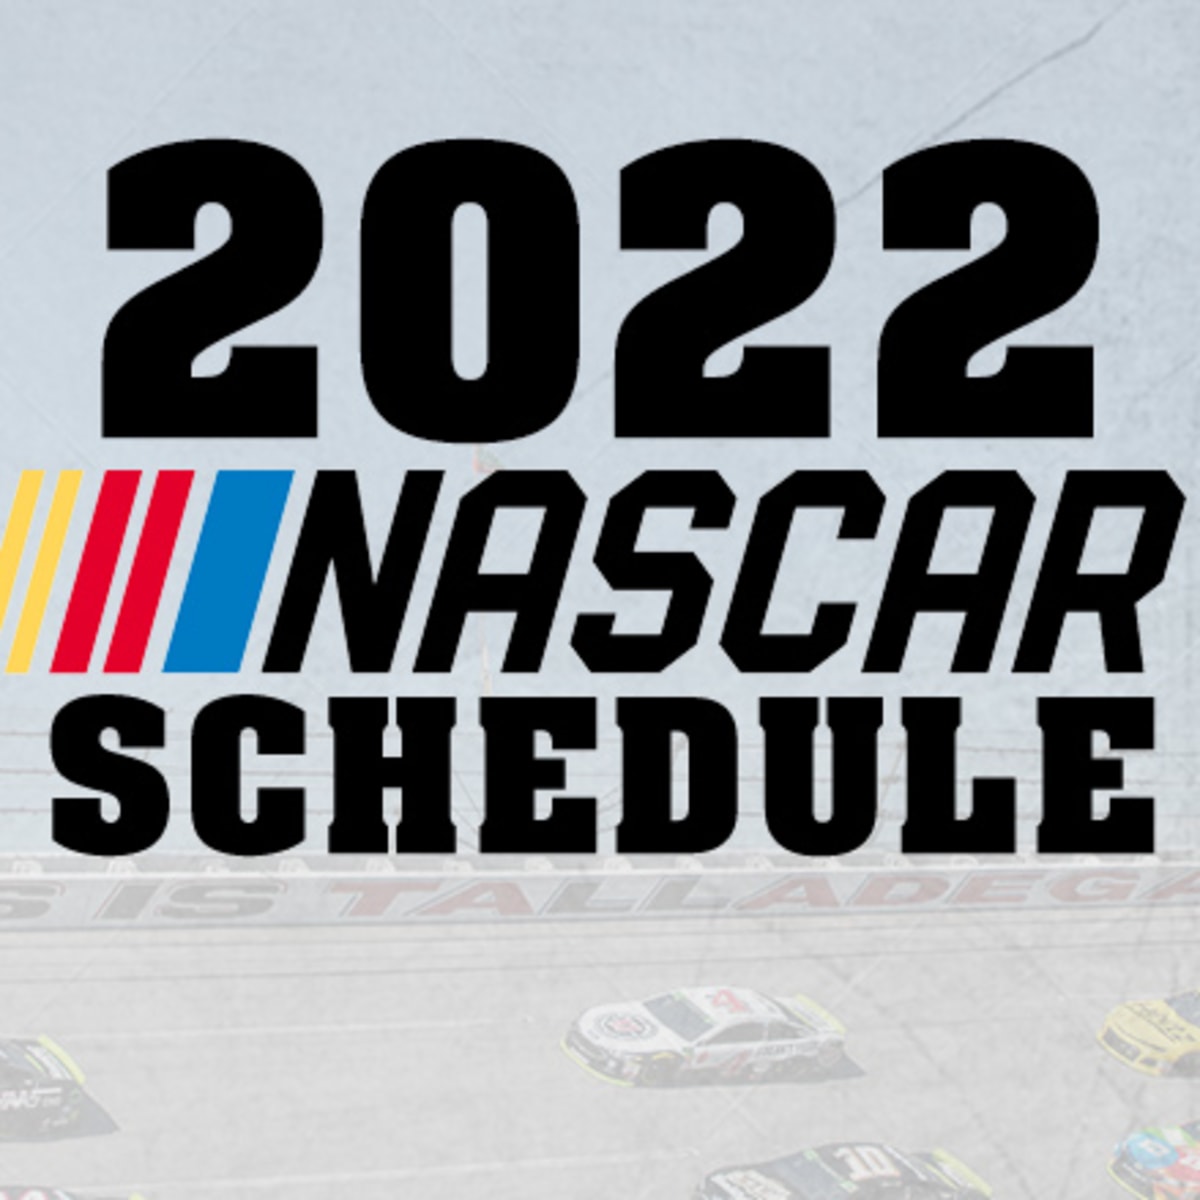 Nascar Schedule 2022 Pdf 2022 Nascar Schedule: Nascar Cup Series - Athlonsports.com | Expert  Predictions, Picks, And Previews